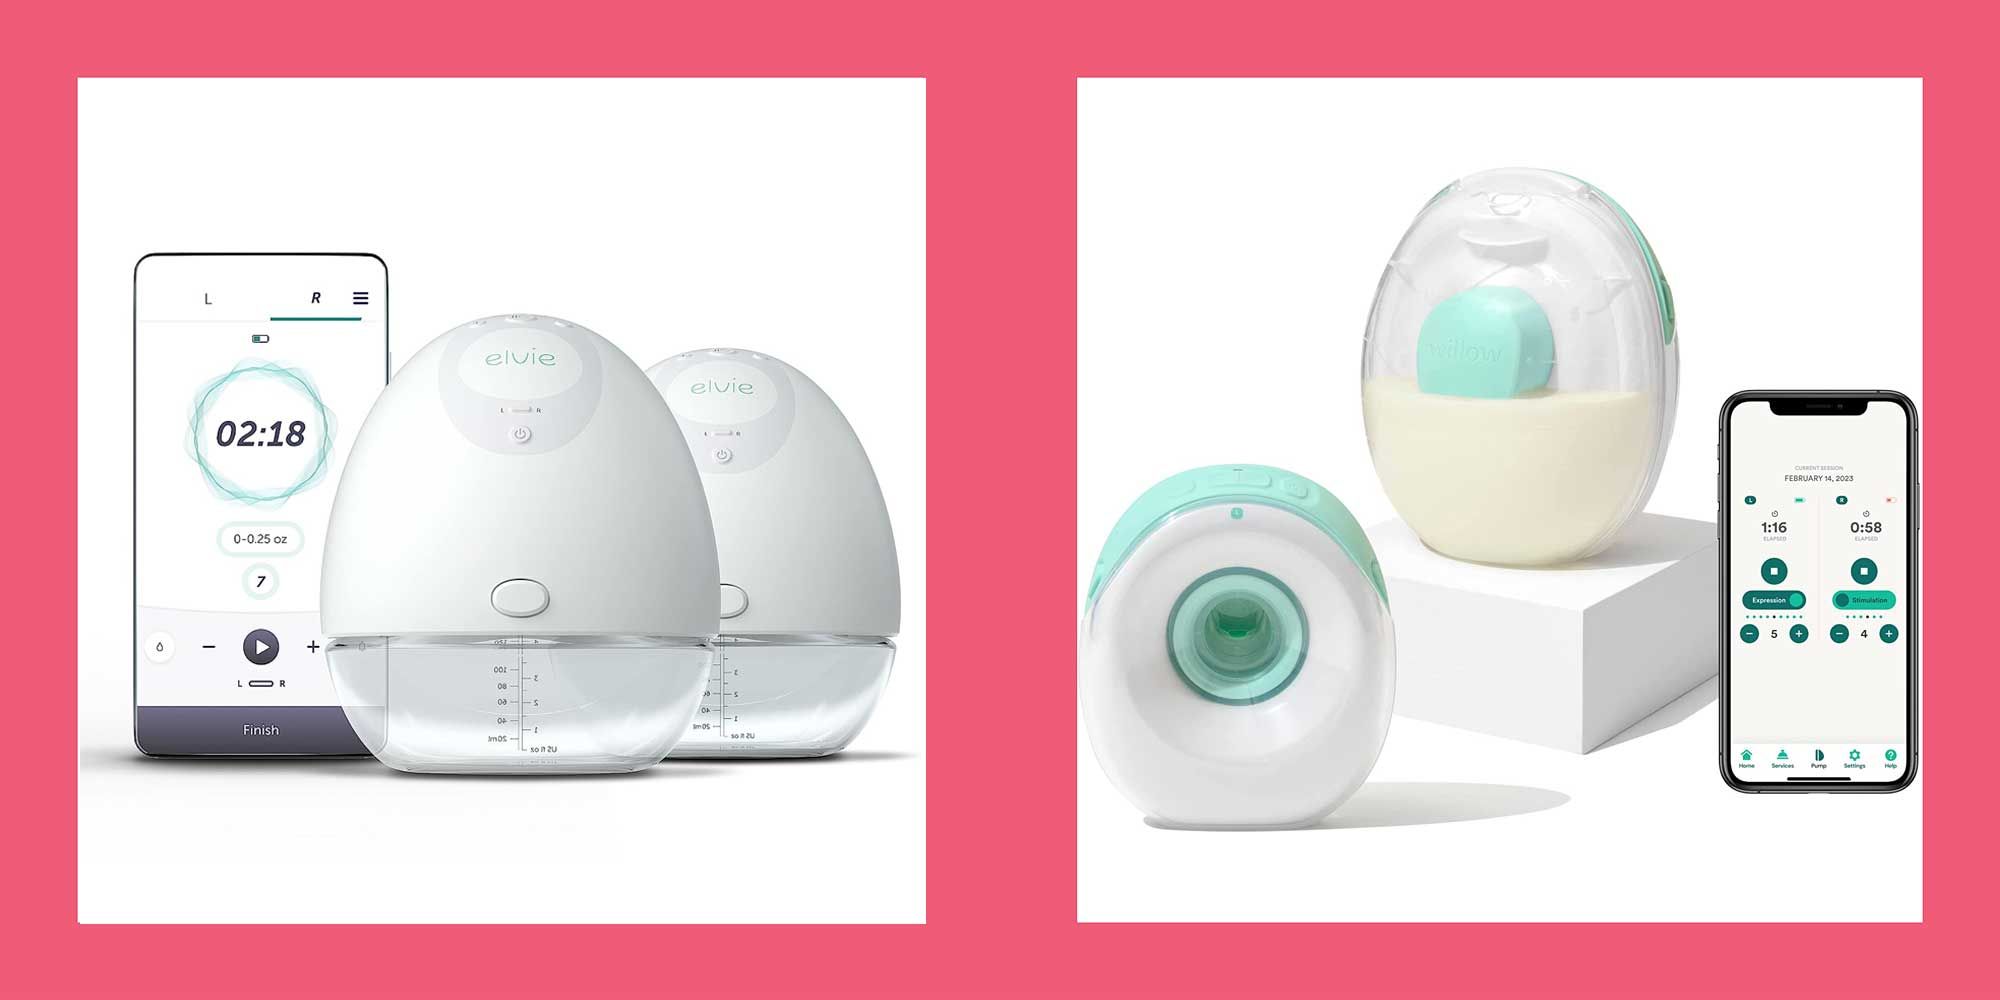 It's easy to get hooked to the Willow breast pump